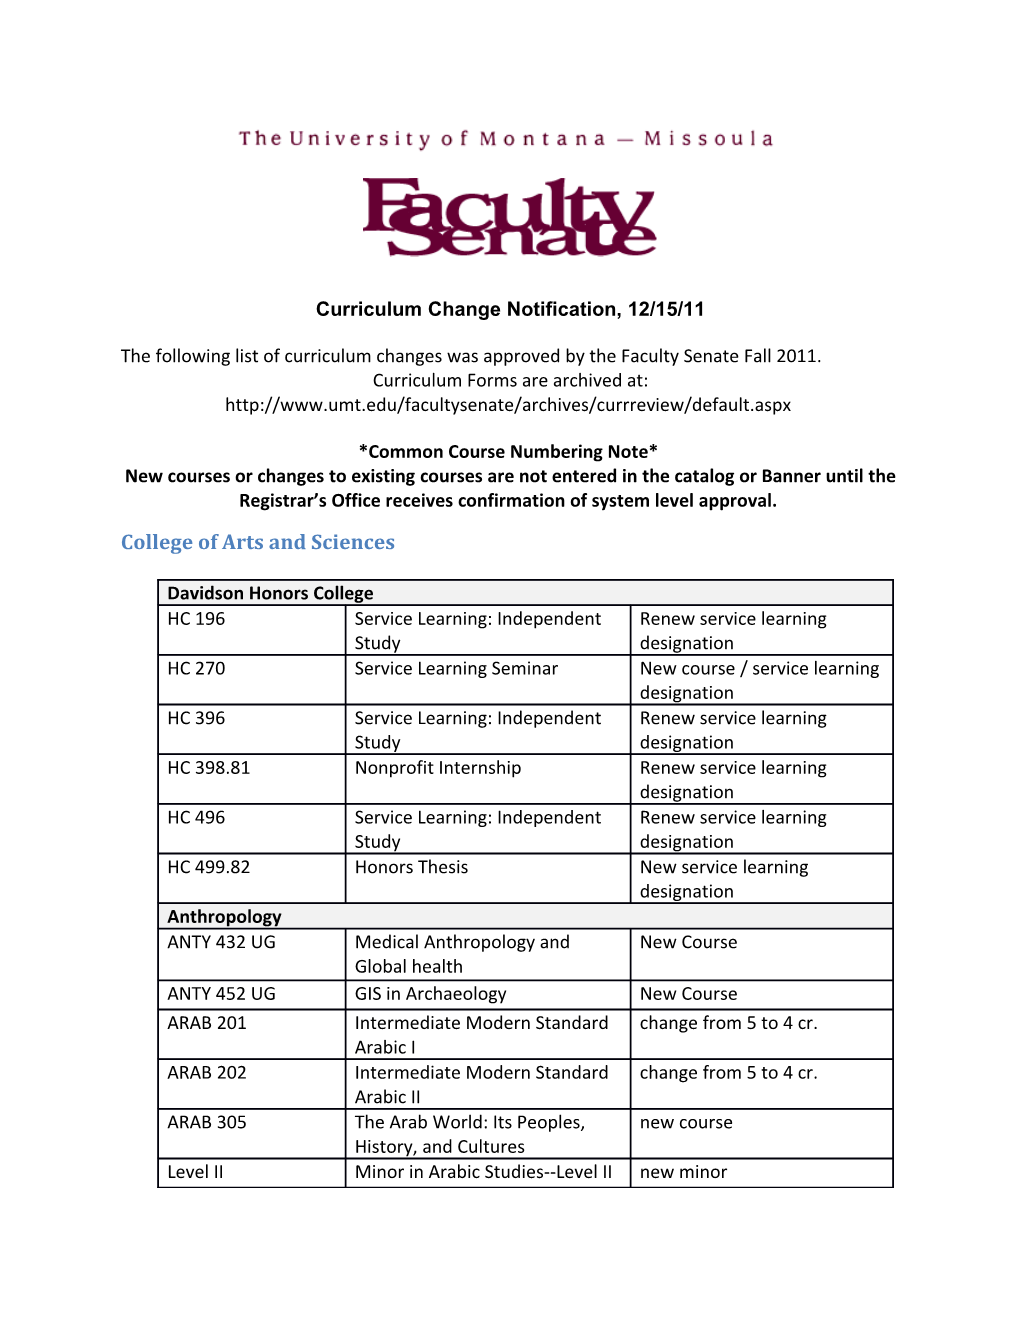 The Following List of Curriculum Changes Was Approved by the Faculty Senate Fall 2011